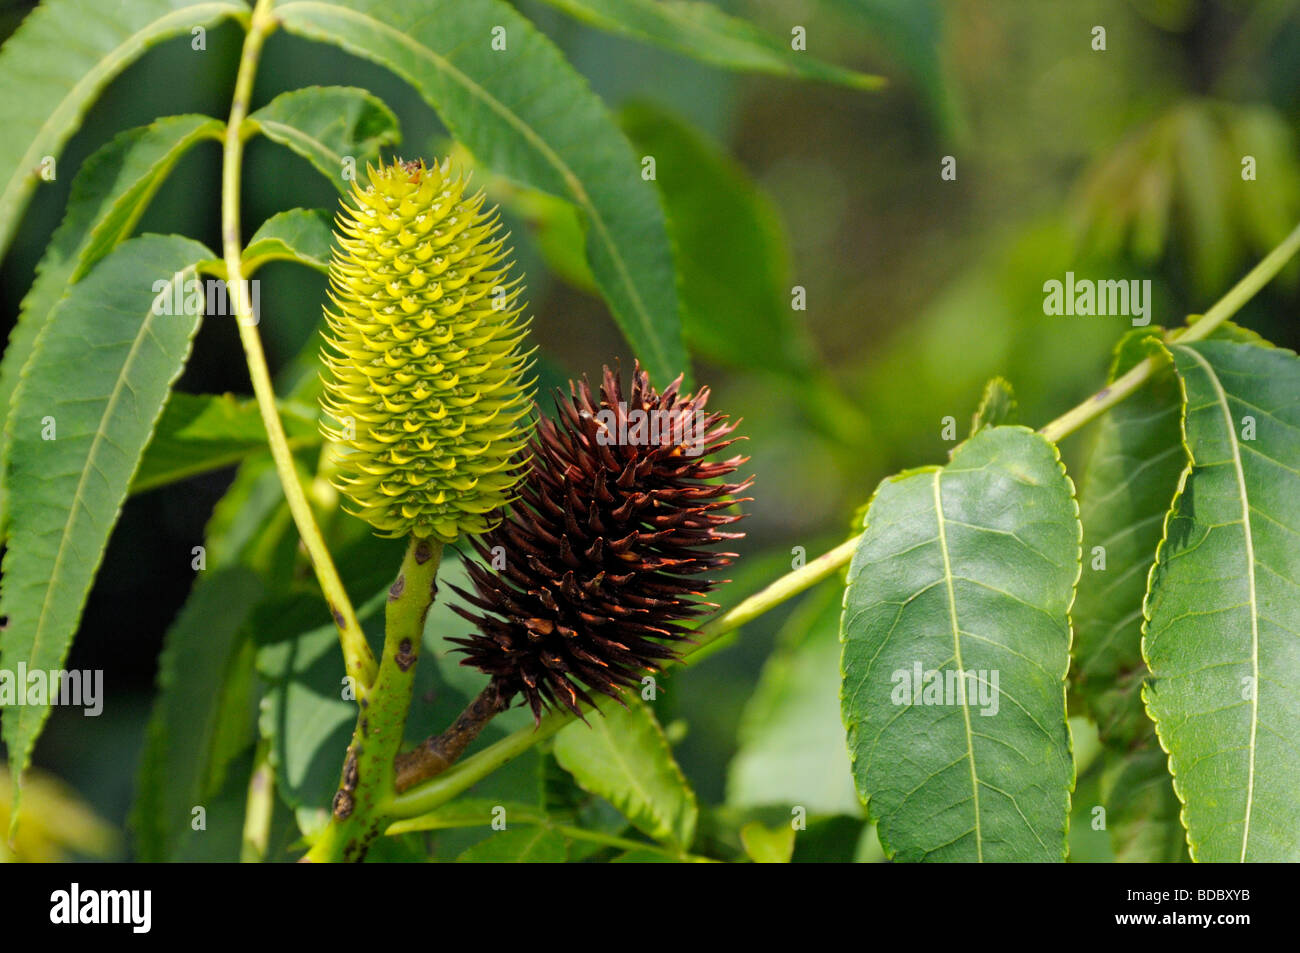 Platycarya strobilacea. Female flower and matured cone-like fruiting body on a twig Stock Photo